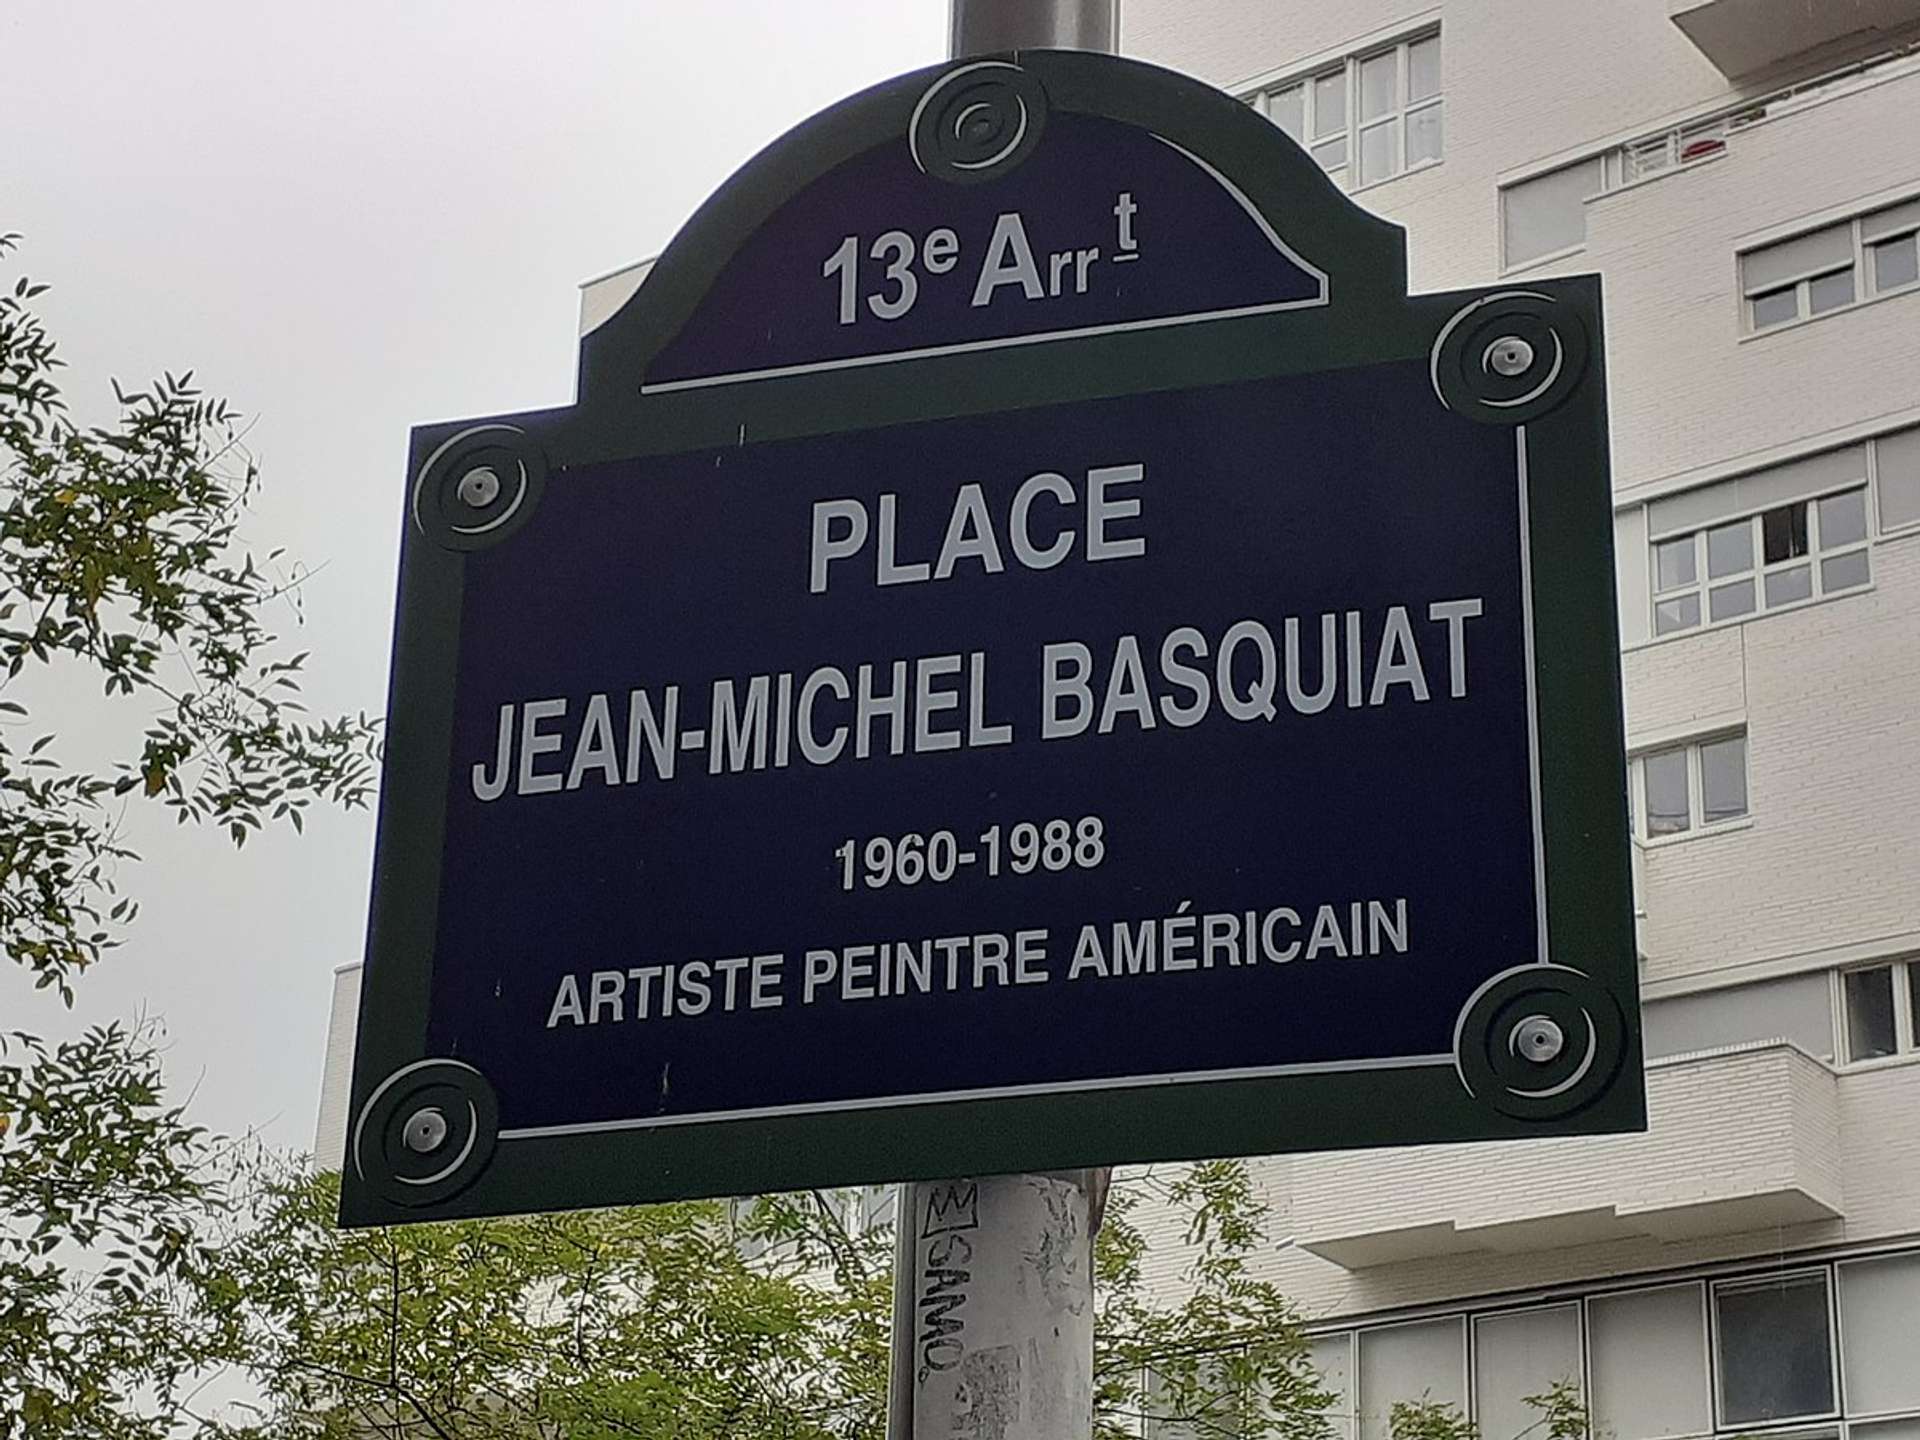 A photograph of the street sign for Place Jean-Michel Basquiat, Paris. Below the sign, on the pole, is a SAMO© tag.